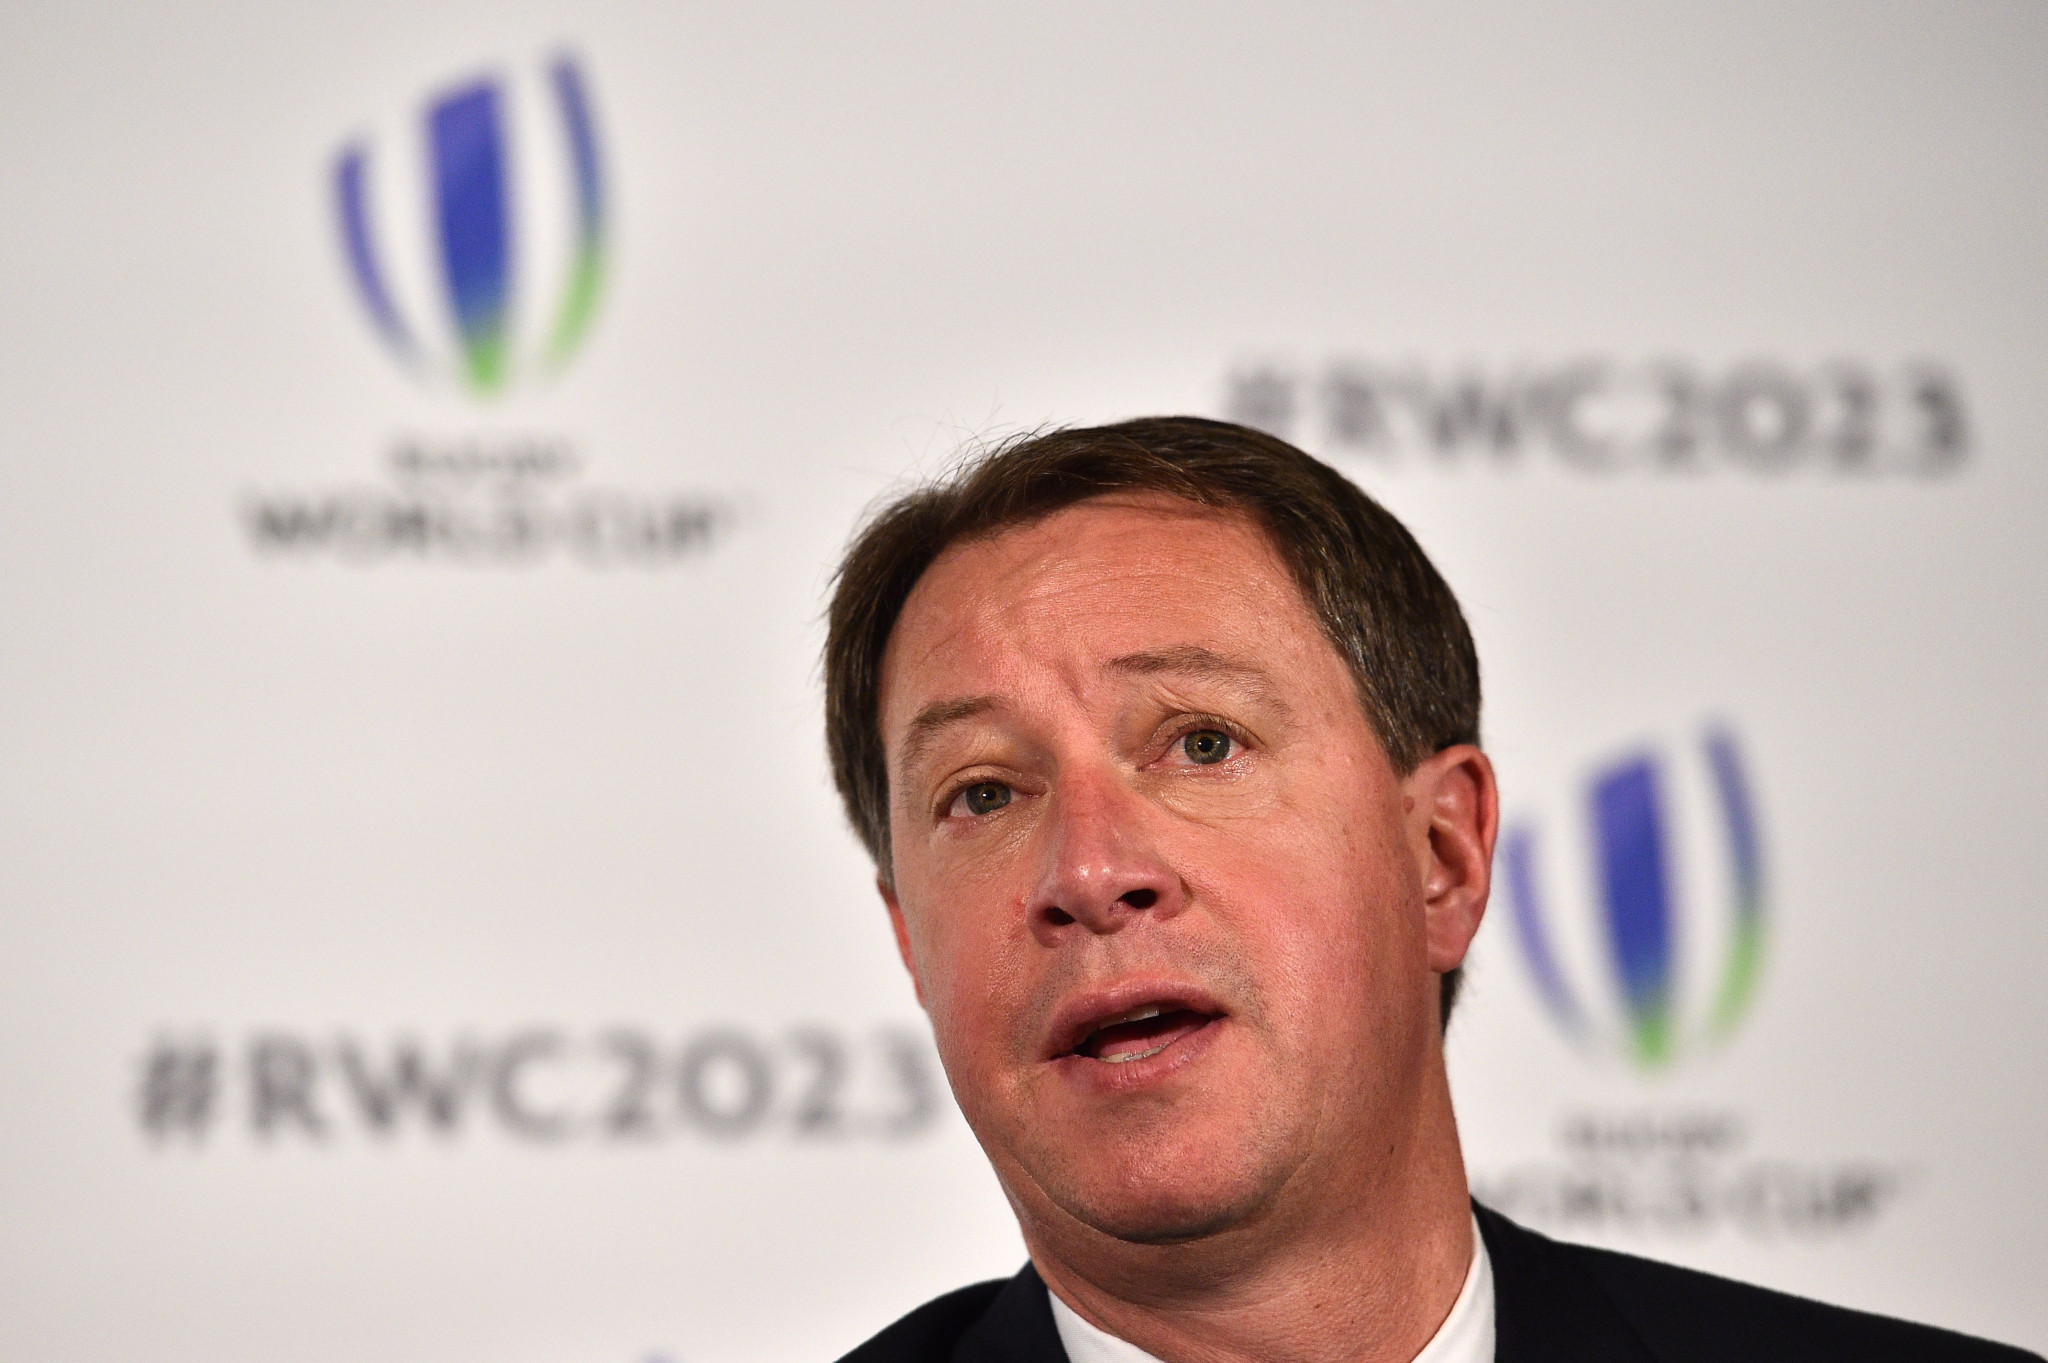 Jurie Roux, chief executive of the South African Rugby Union, says that France and Ireland should 